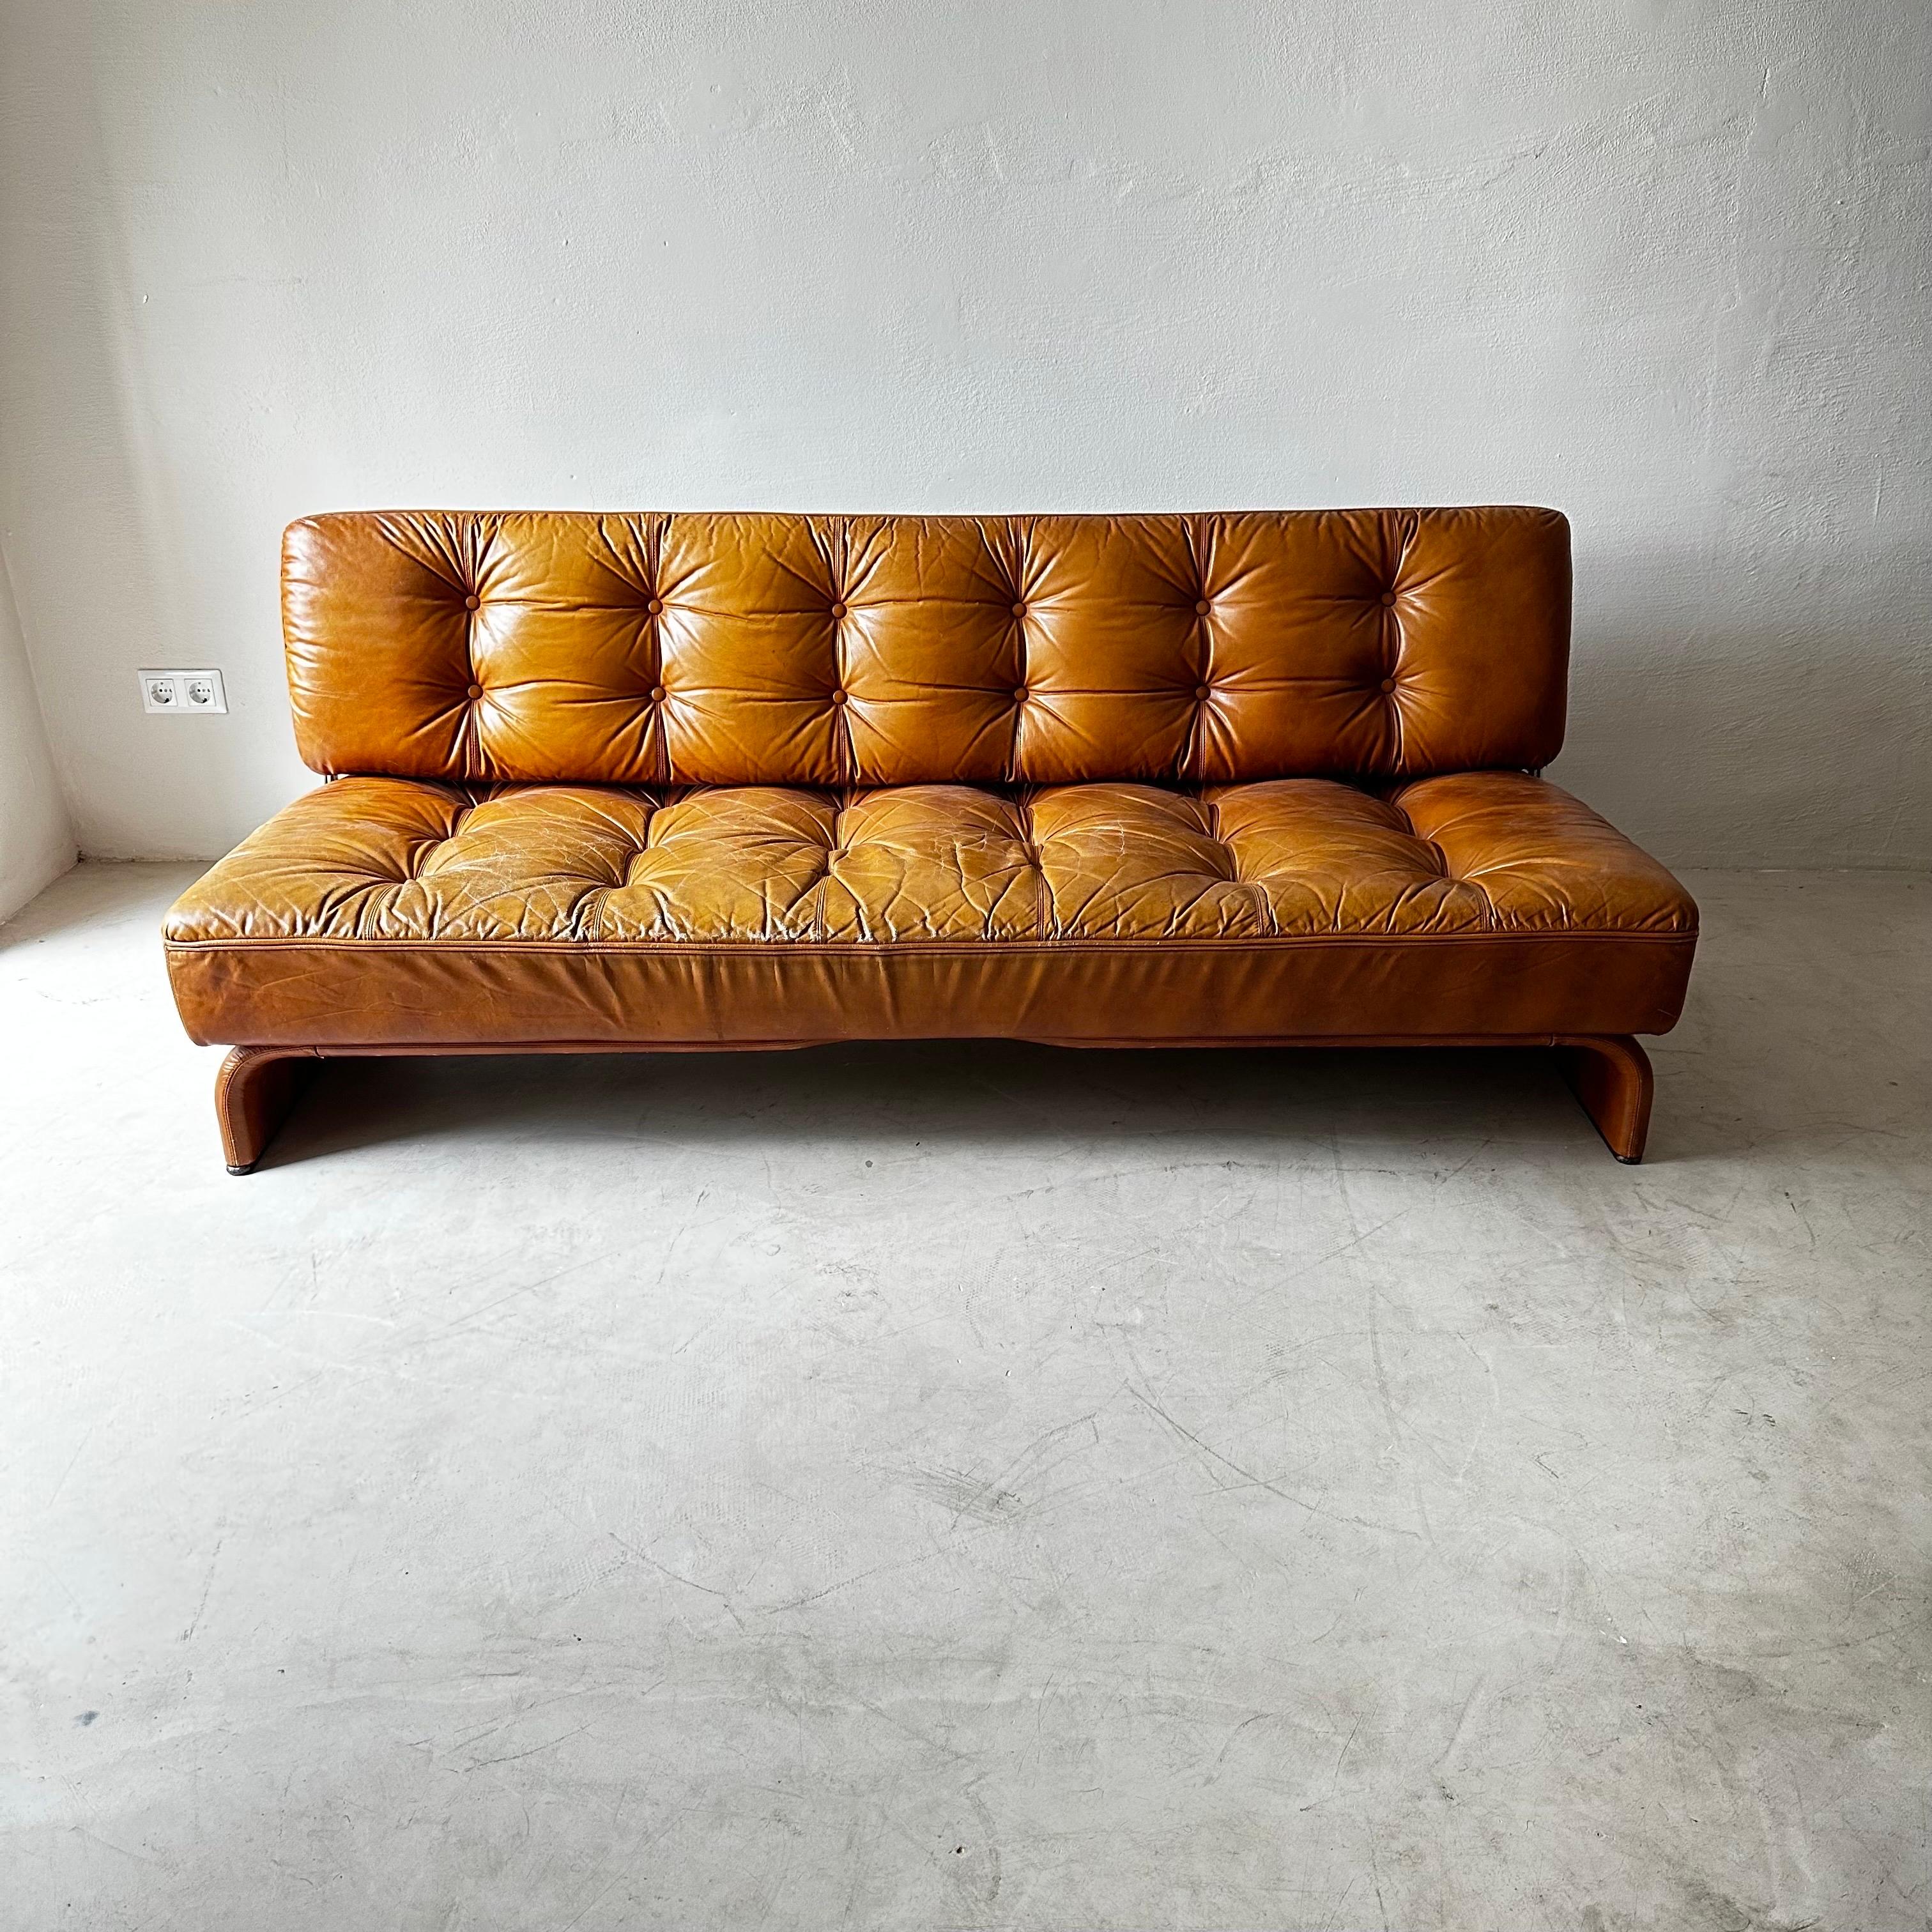 Johannes Spalt for Wittmann 'Constanze' Sofa in Cognac Leather In Good Condition For Sale In Vienna, AT